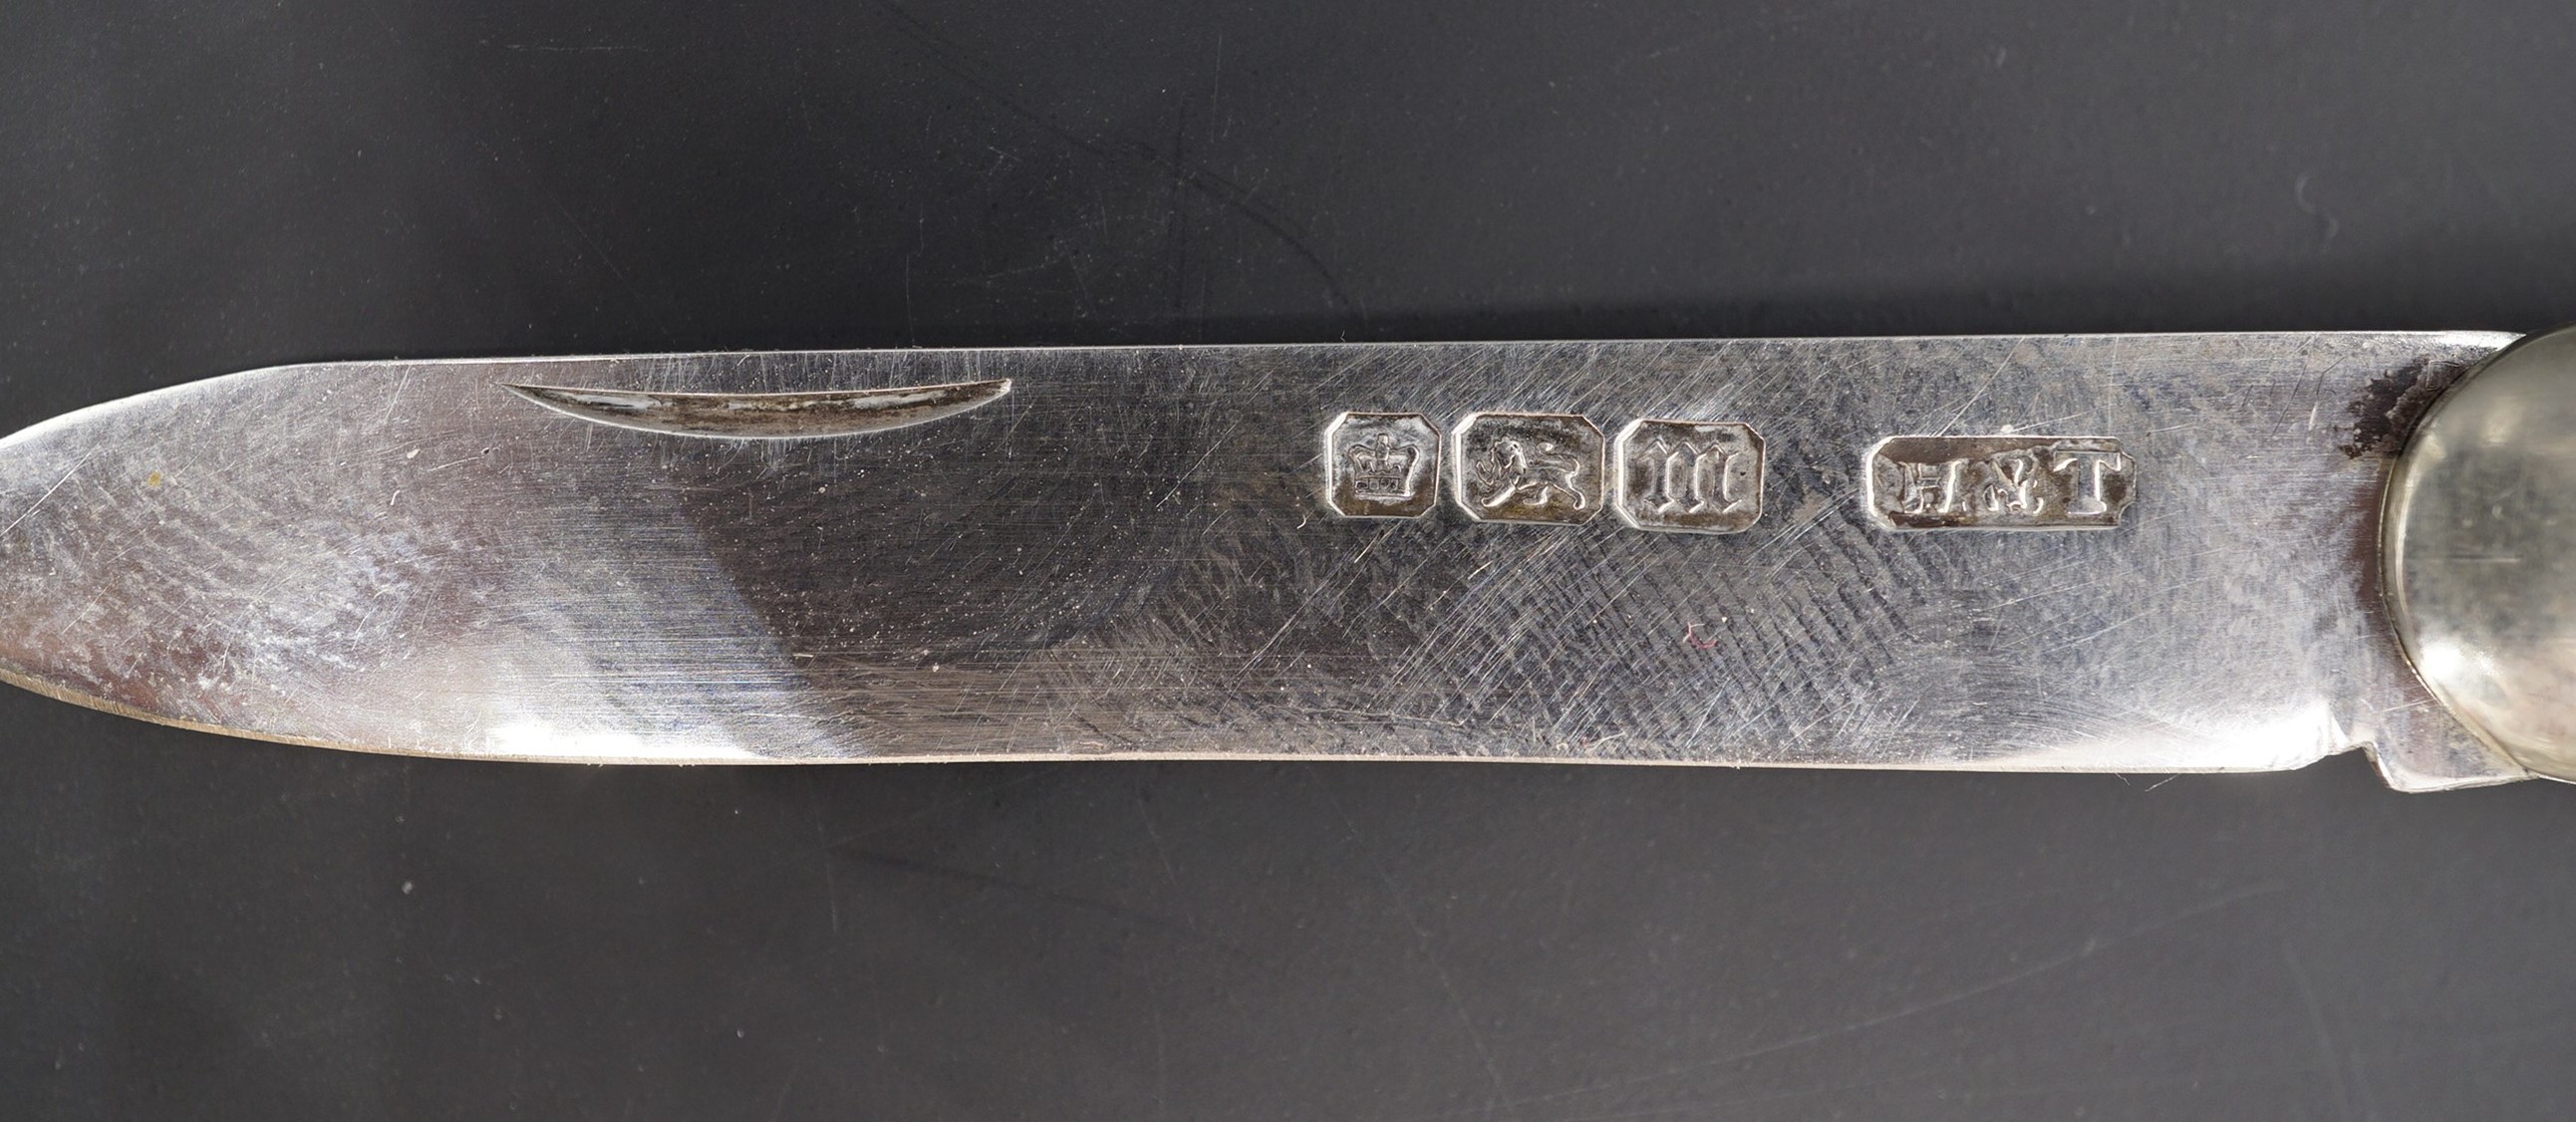 An Edwardian silver mother-of-pearl handled fruit knife, Hilliard & Thomason, Sheffield, 1904, 18 g, - Image 2 of 4